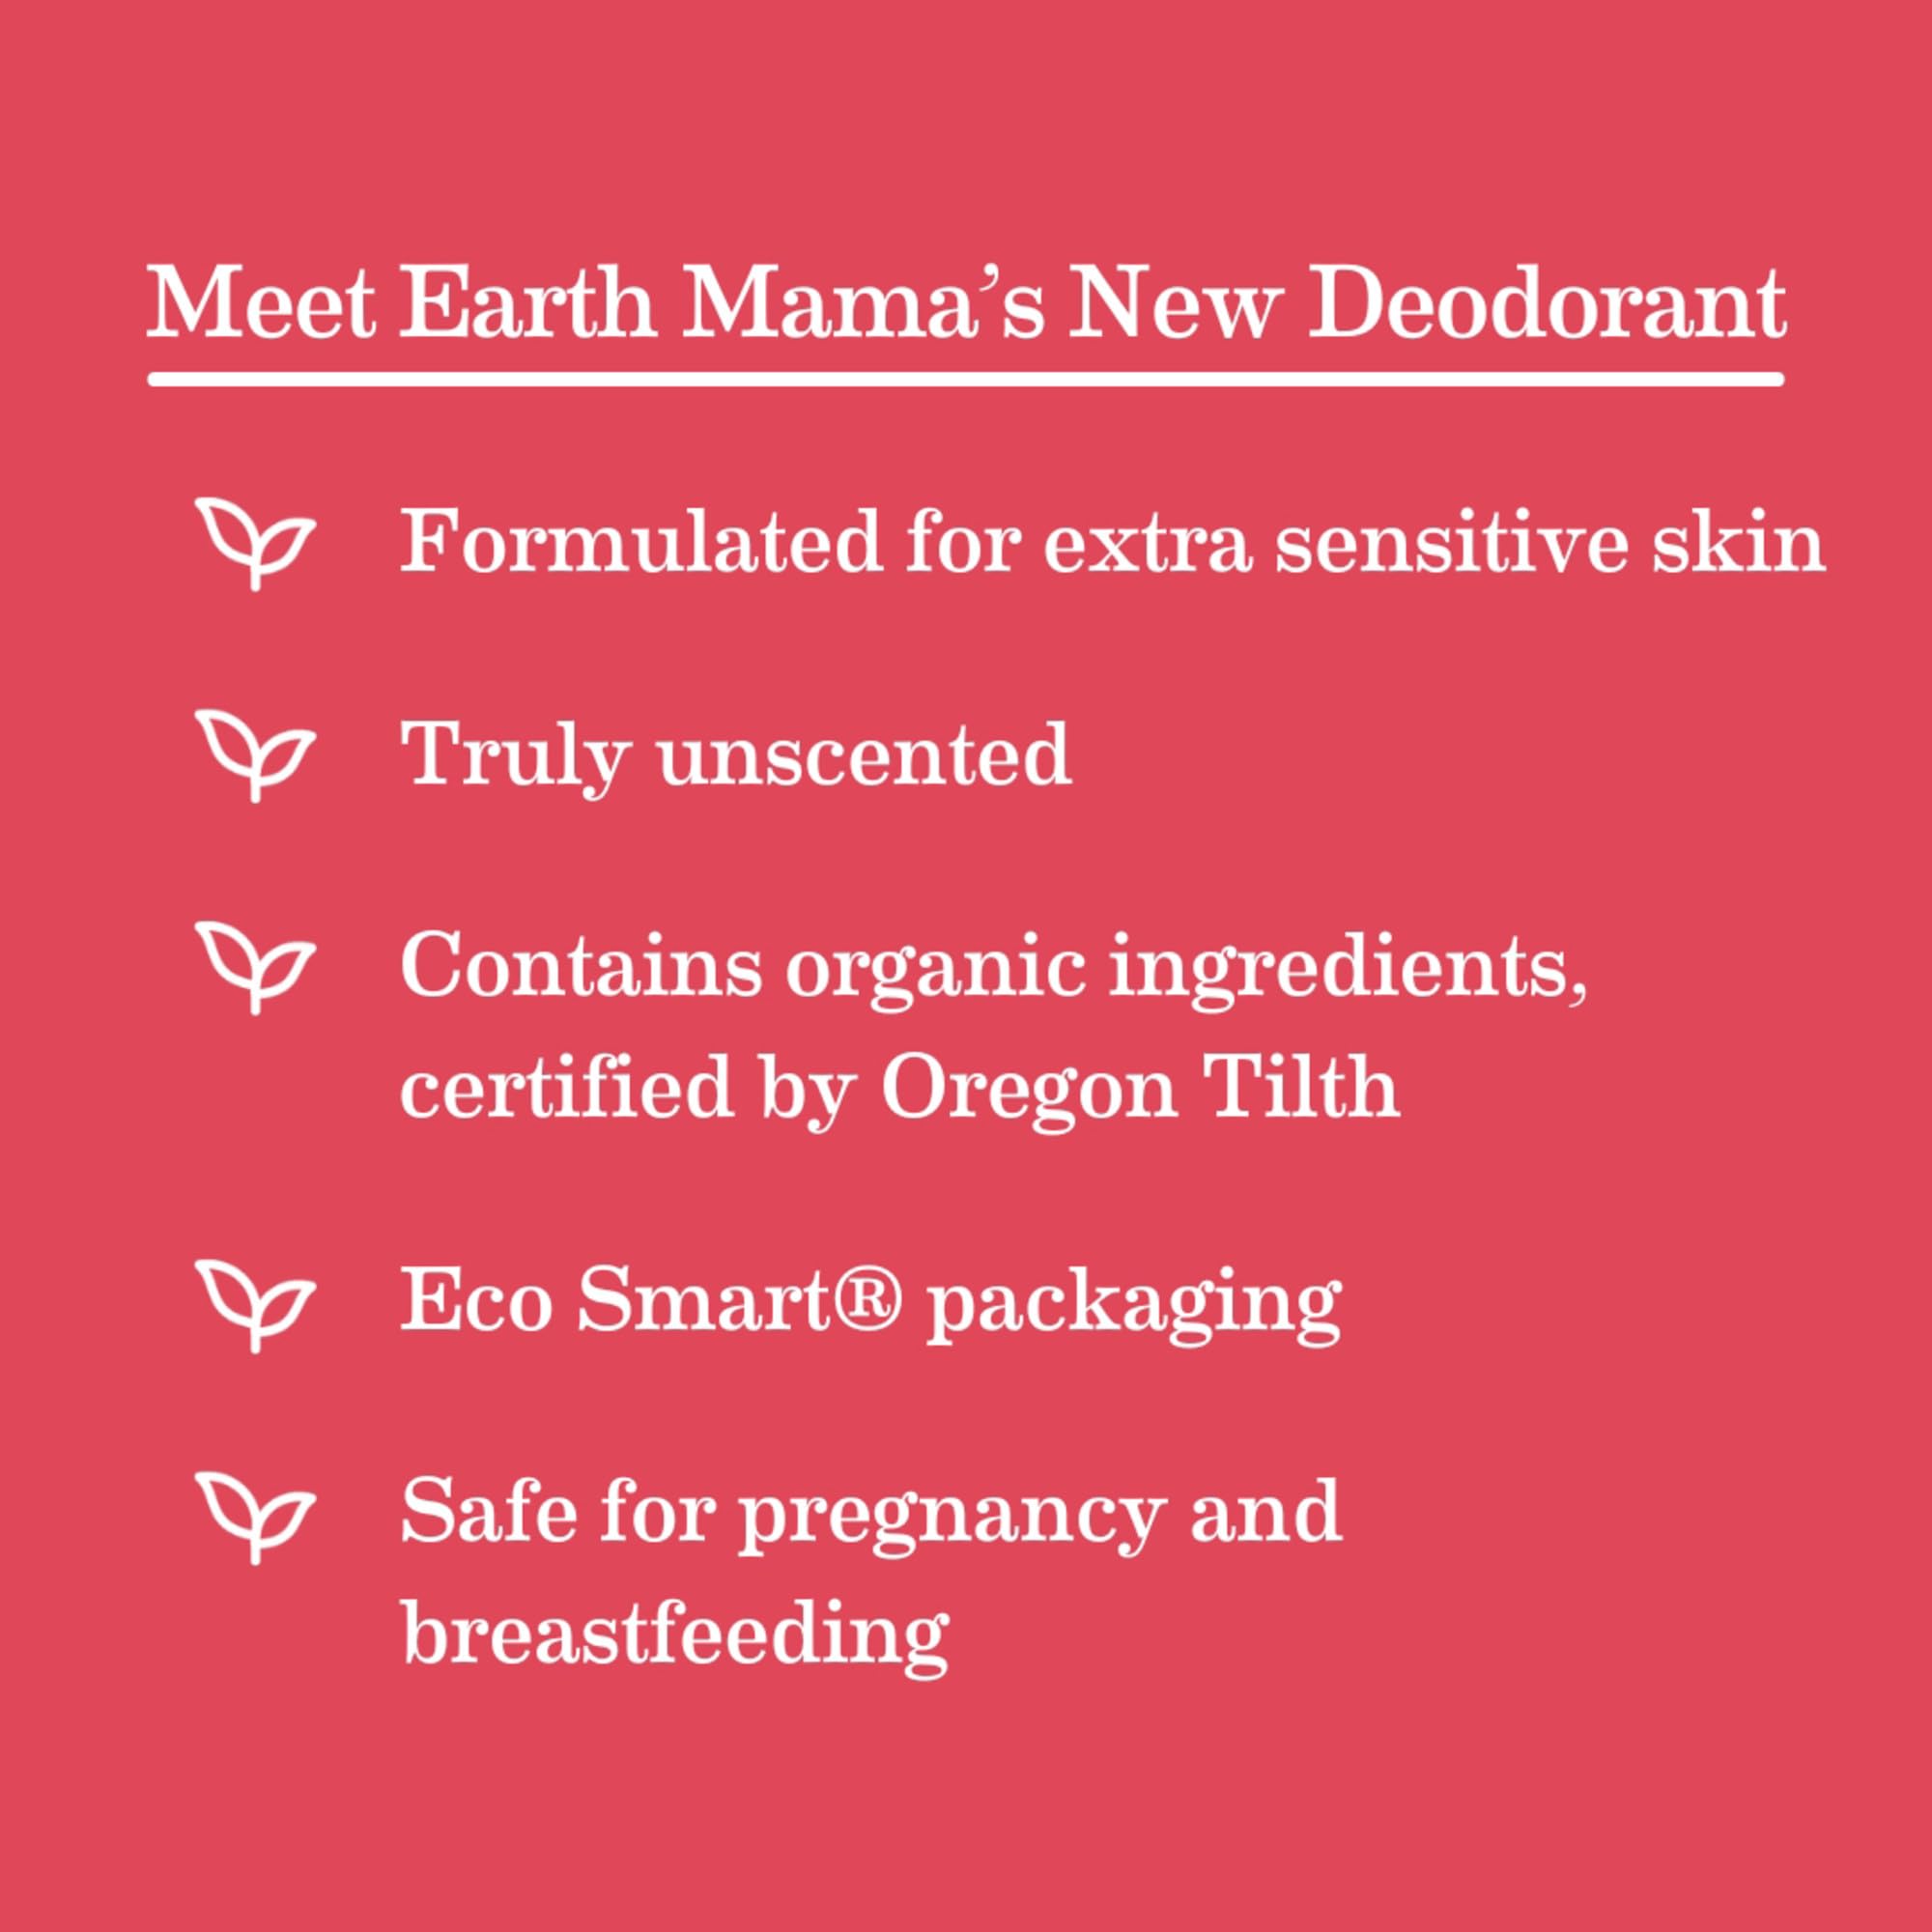 Earth Mama Simply Non-Scents Deodorant | Fragrance-free + Safe for Sensitive Skin, Pregnancy and Breastfeeding, Organic Calendula and Coconut Oil, Baking Soda and Aluminum Free, 2.65-Ounce (2-Pack)